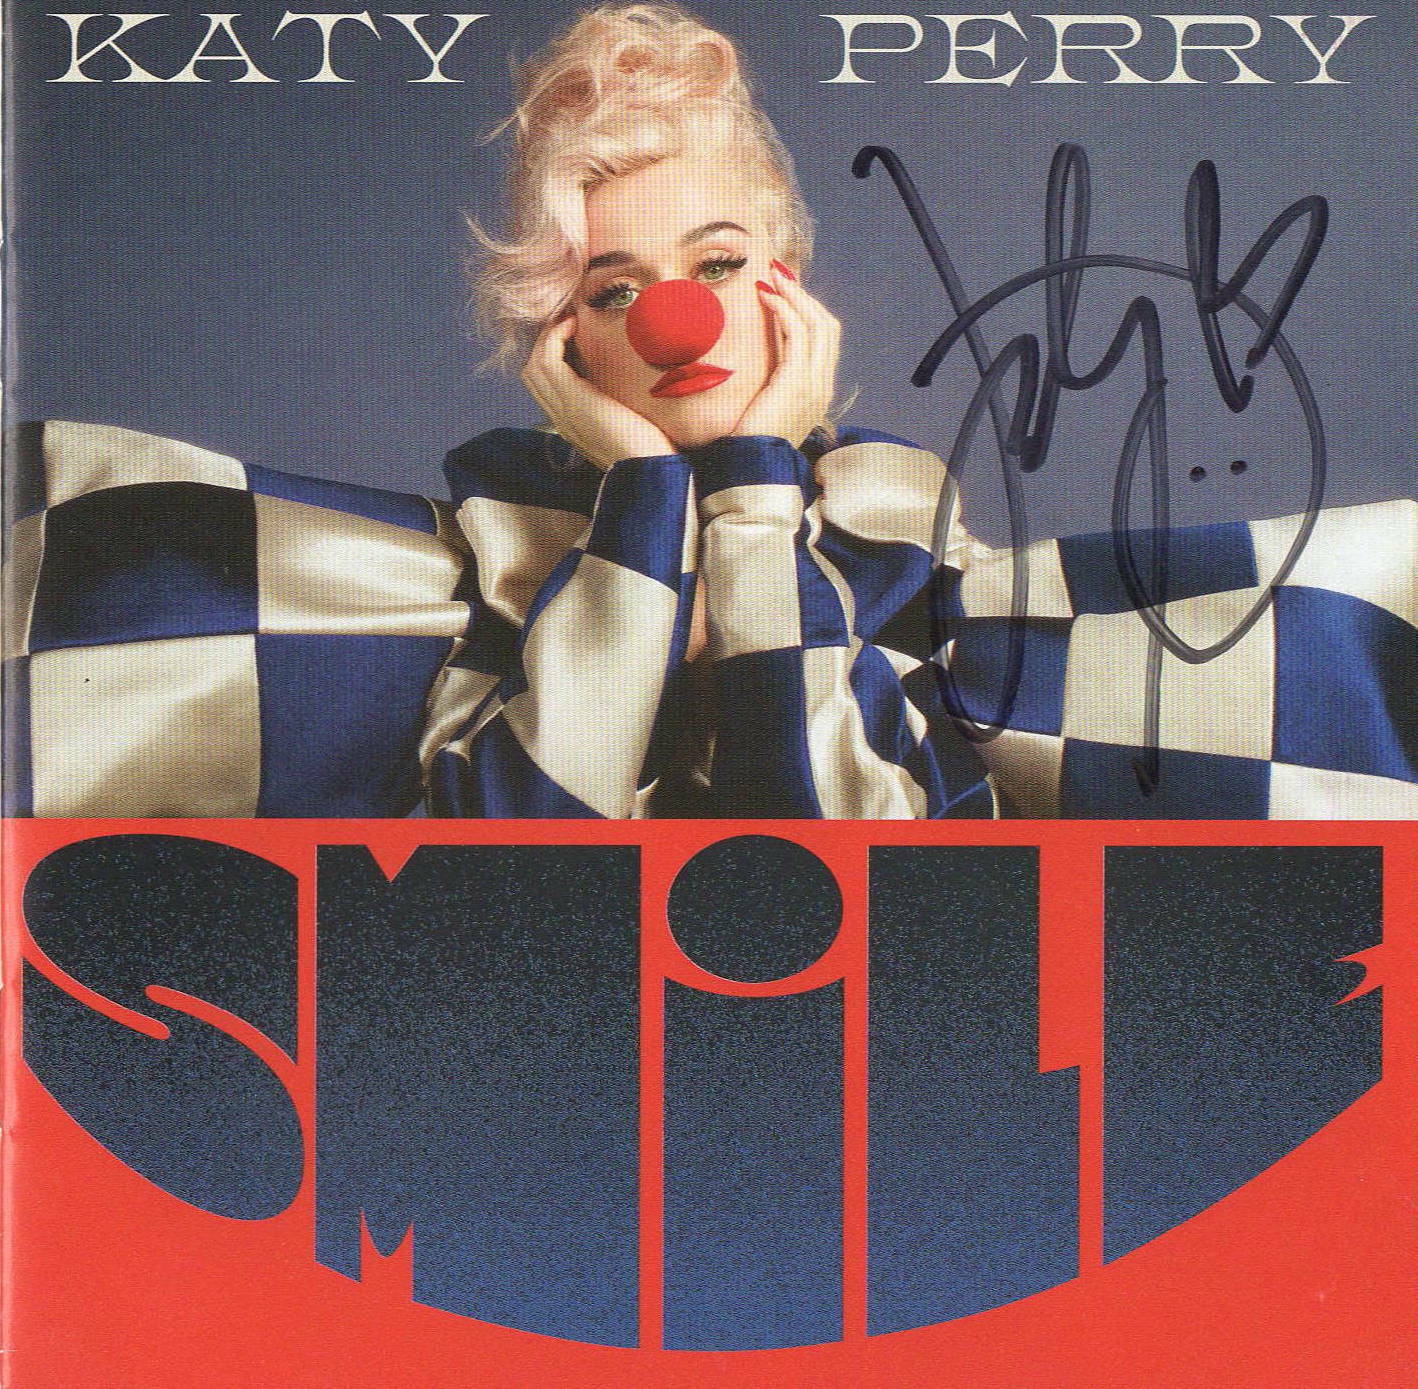 KATY PERRY SIGNED AUTOGRAPH SMILE ROCK CD BOOKLET BECKETT BAS 2